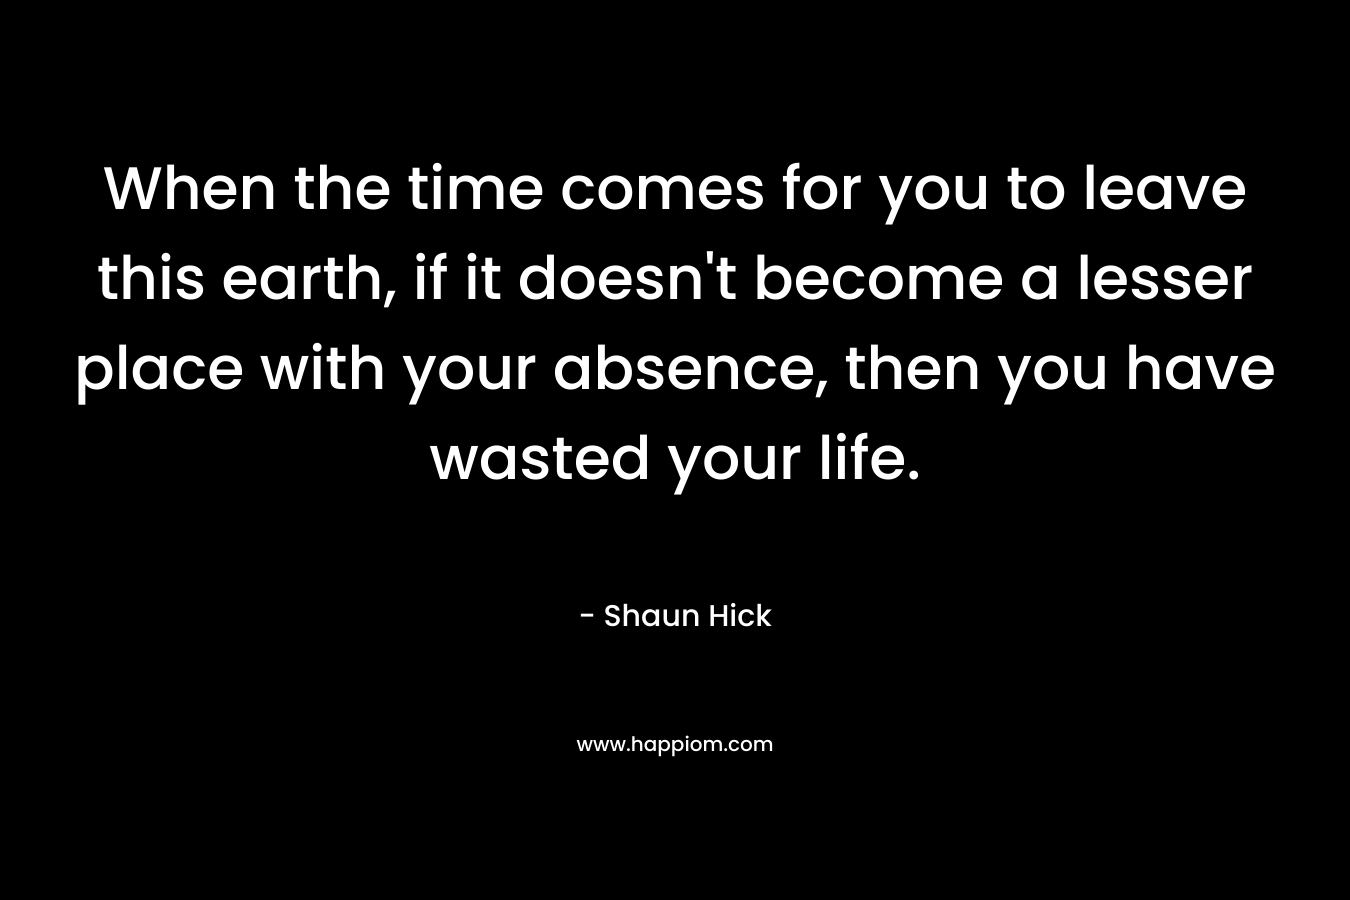 When the time comes for you to leave this earth, if it doesn’t become a lesser place with your absence, then you have wasted your life. – Shaun Hick